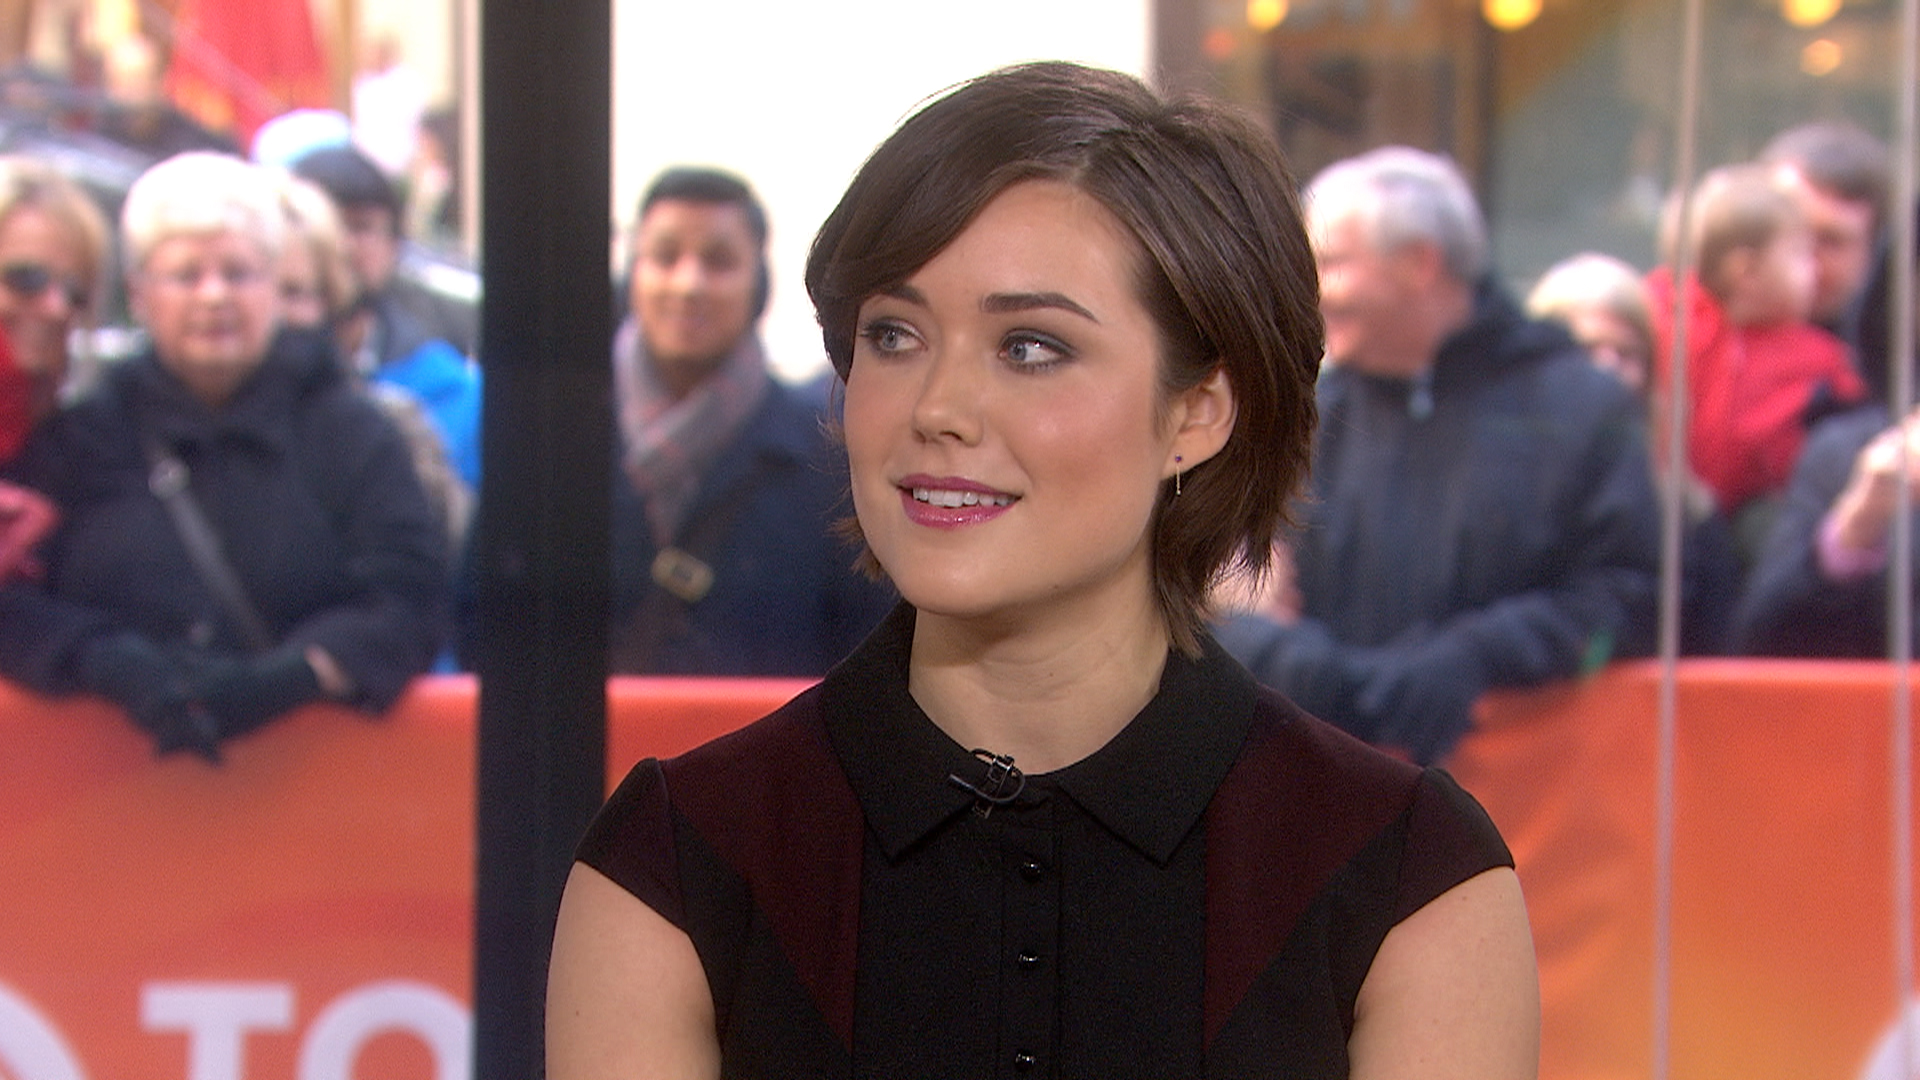 Blacklist' star Megan Boone deals with hairy situations on screen and off